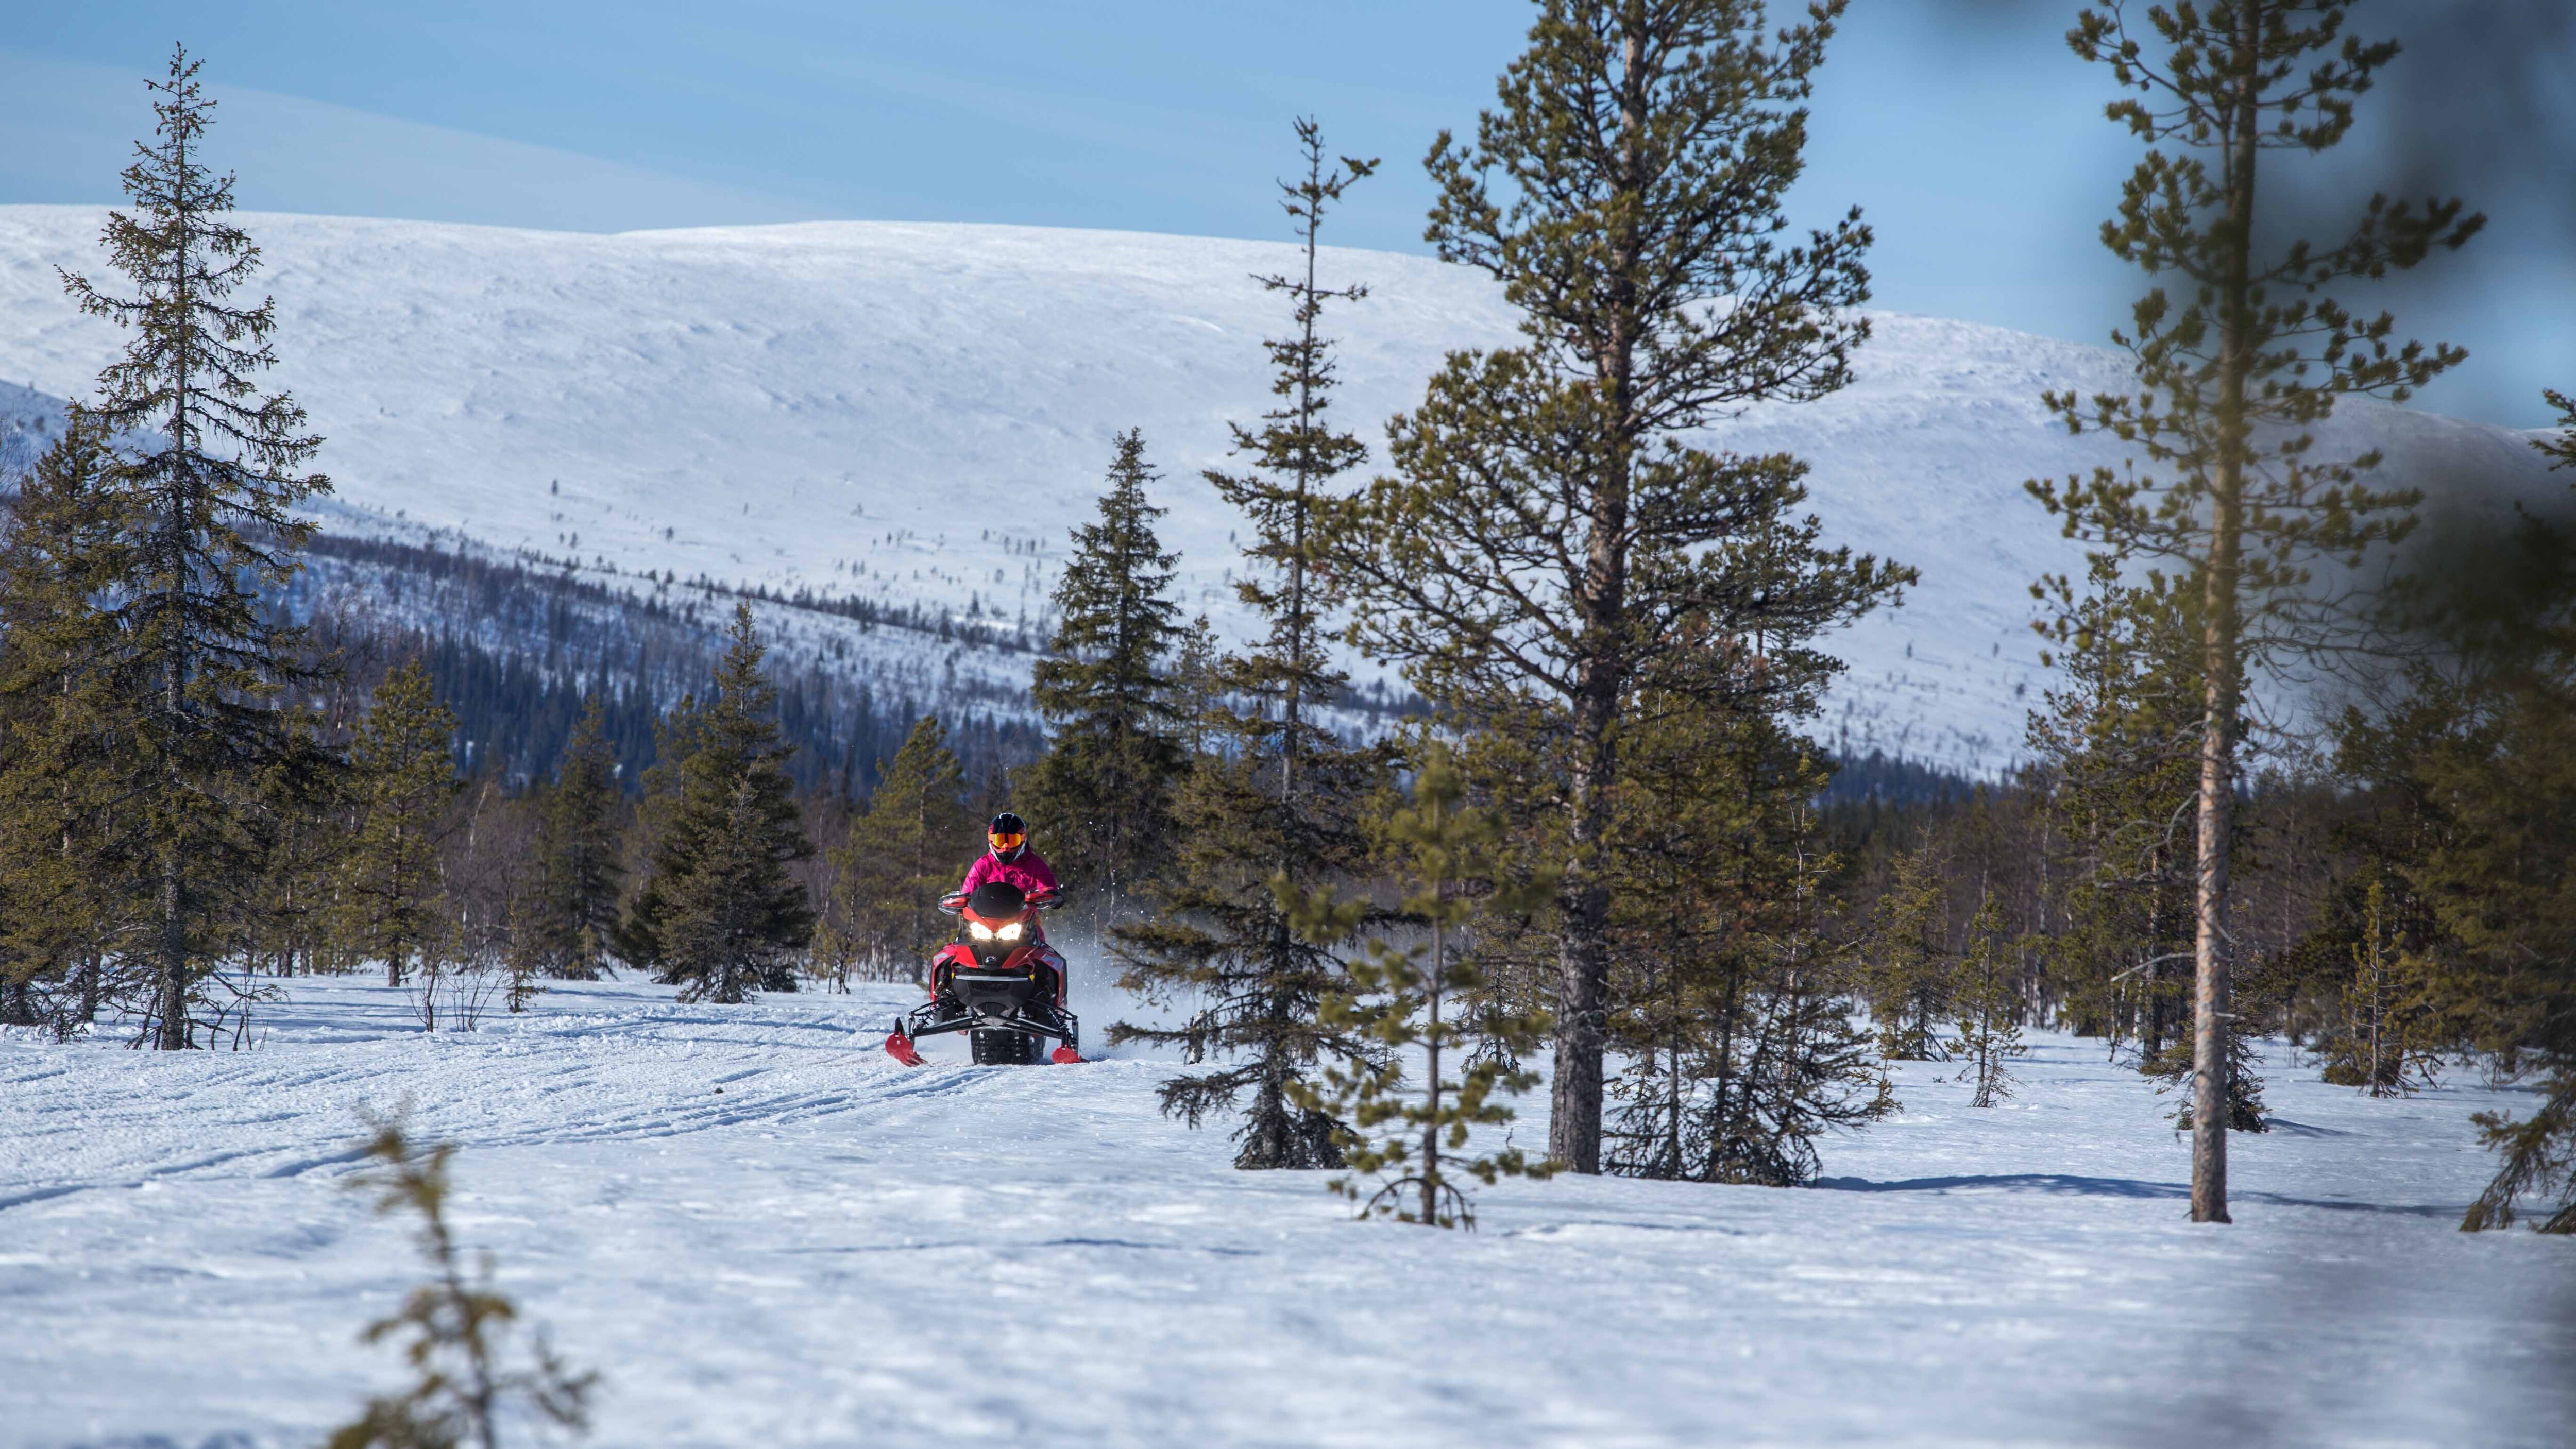 Emma Kimiläinen riding on trail with mountain view in Lapland, Finland with 2022 Lynx Rave RE 850 E-TEC snowmobile